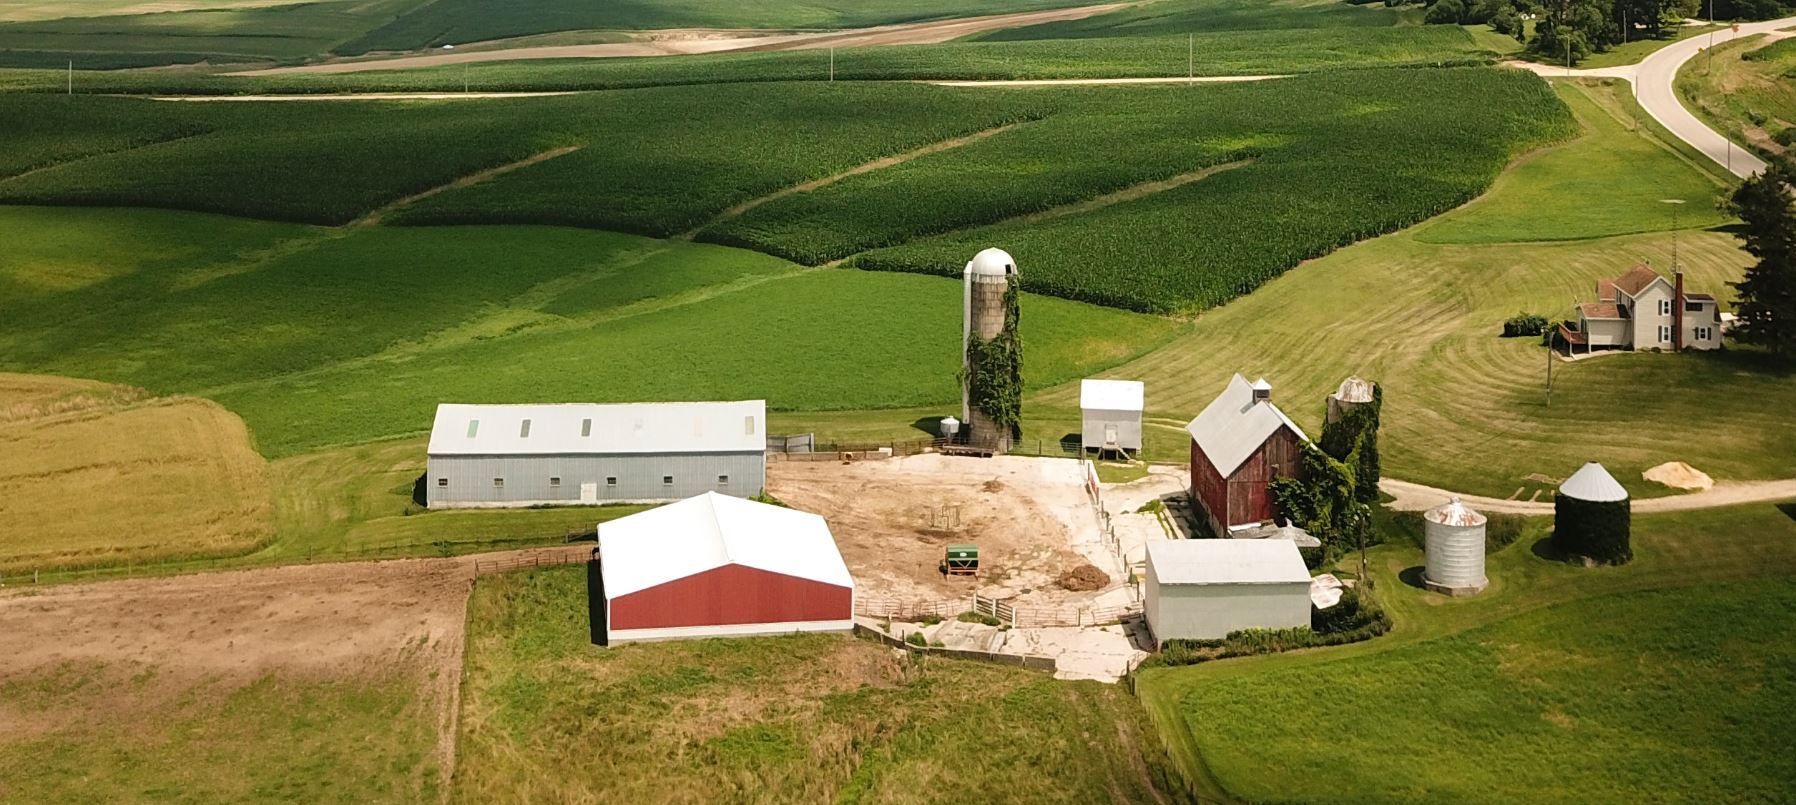 Image of farm from the air